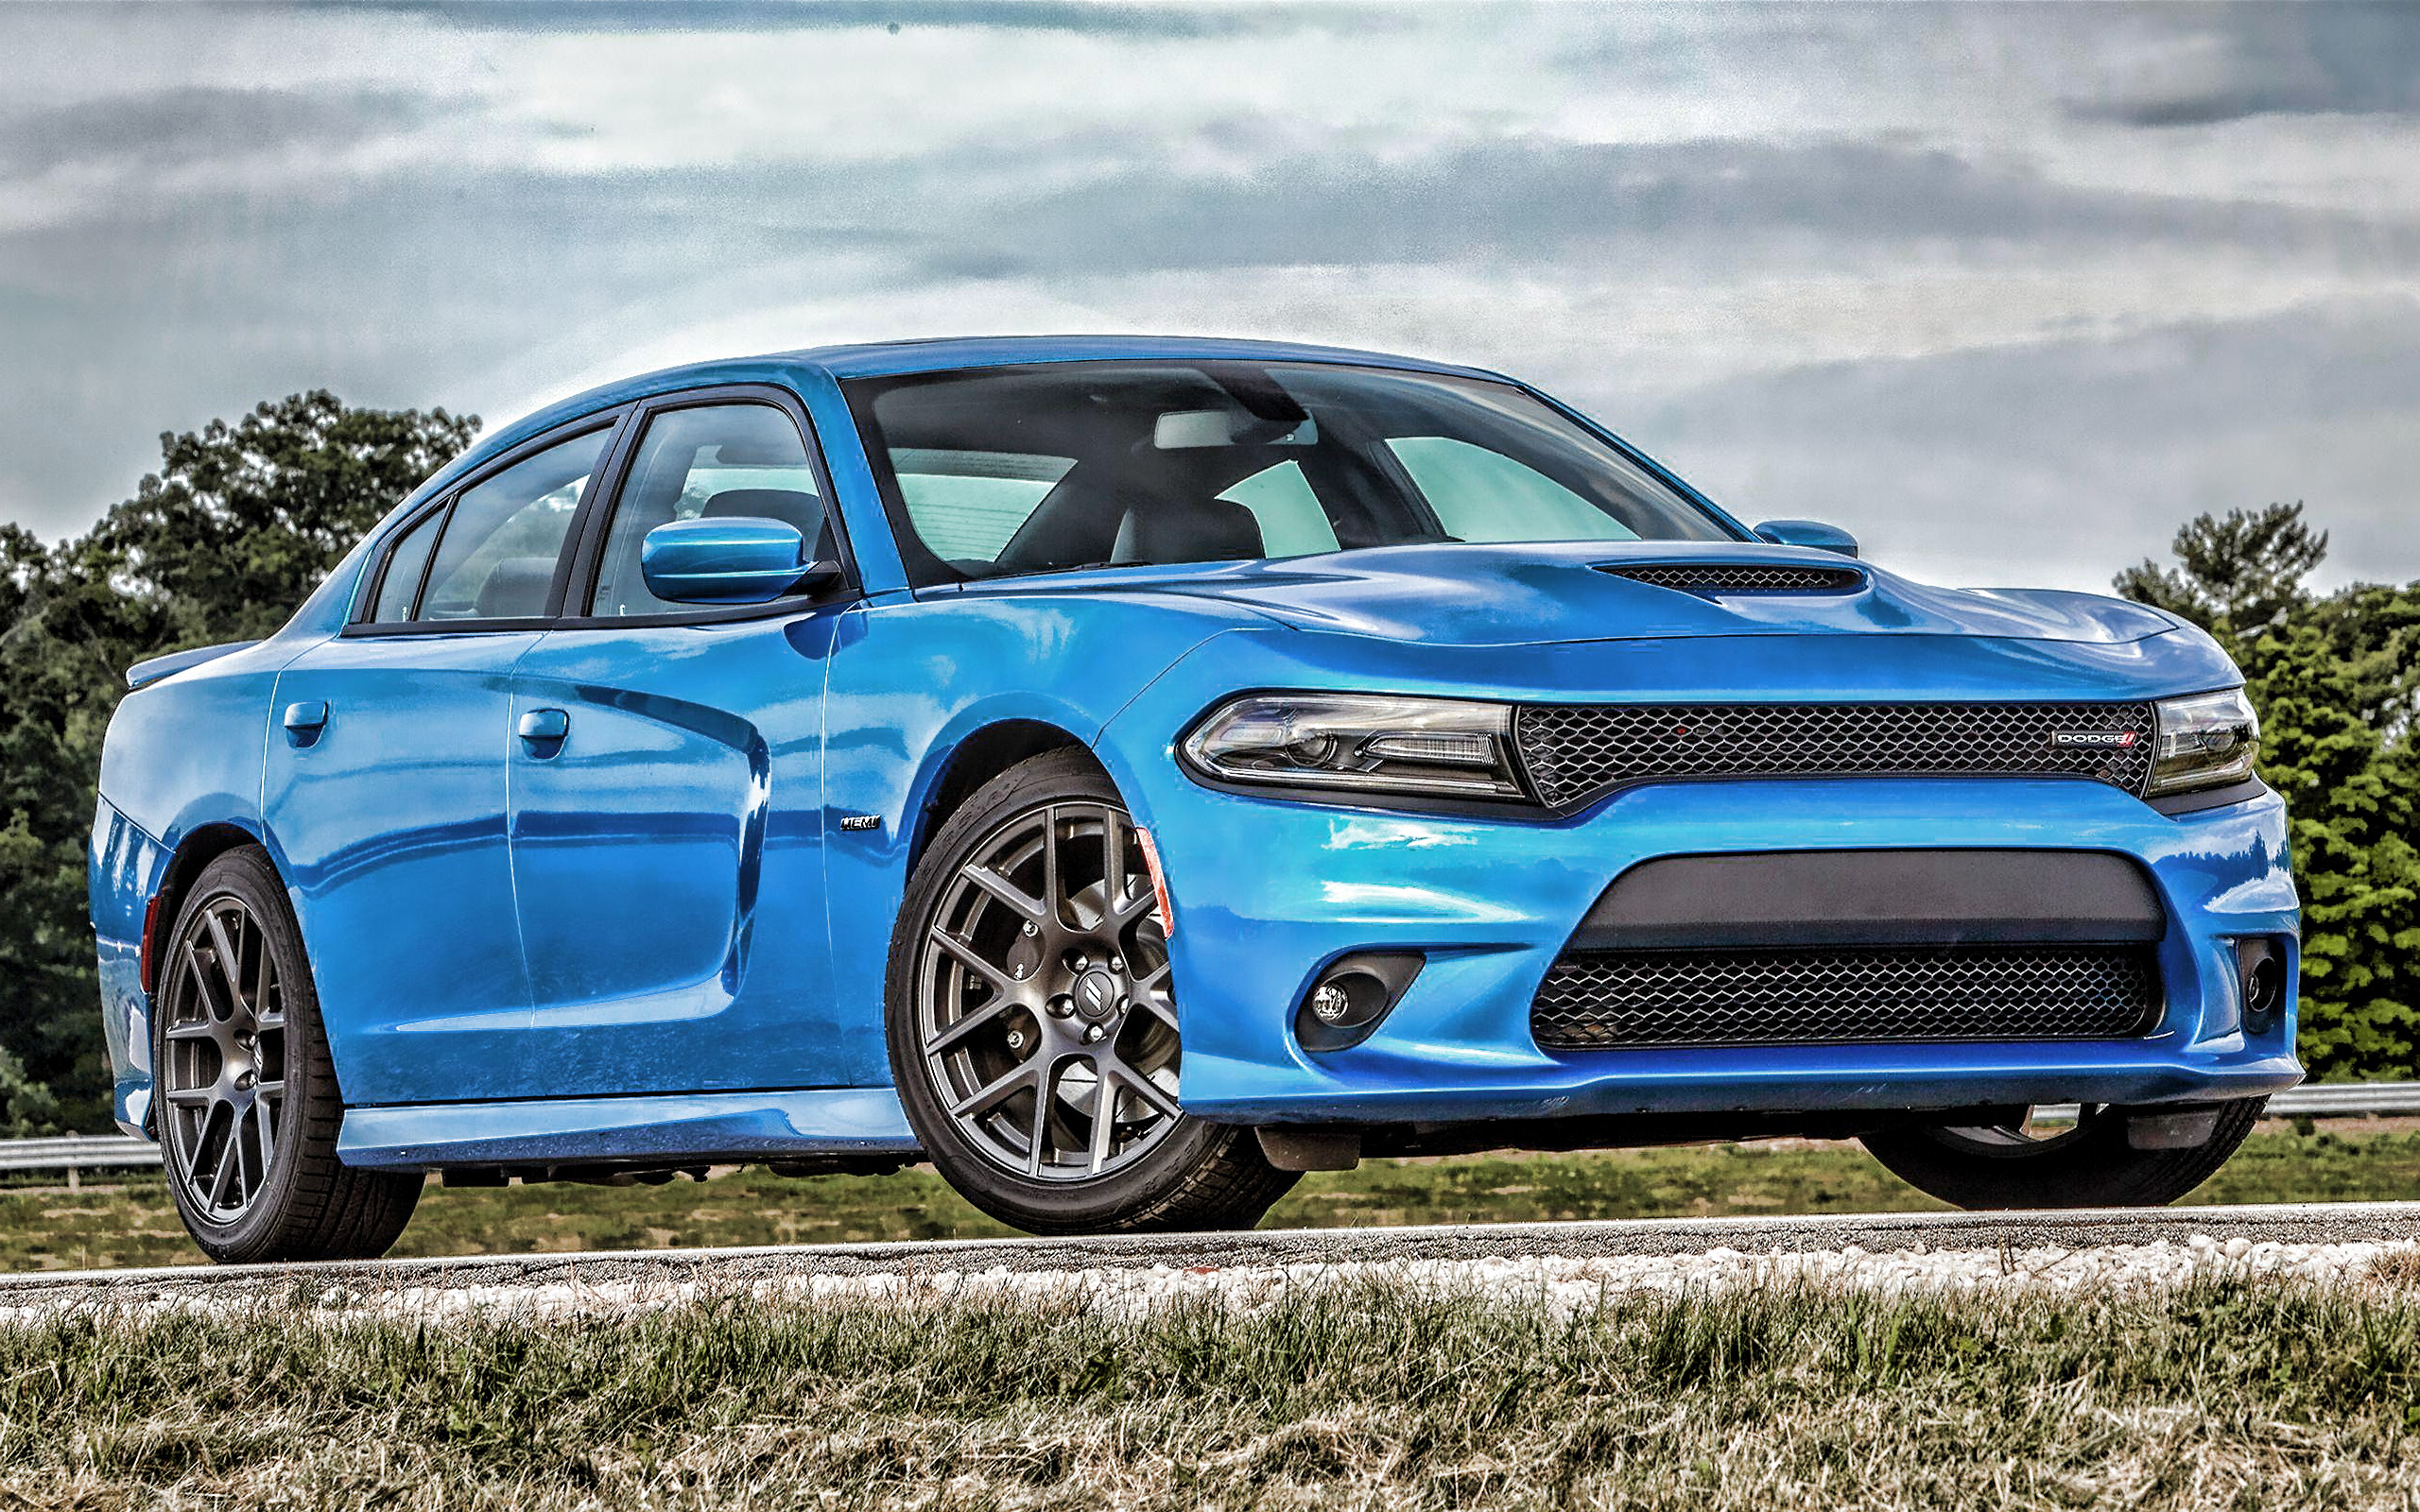 Dodge Charger Rt, Hdr, 2018 Cars, American Cars, Blue - 2019 Dodge Charger Rt - HD Wallpaper 